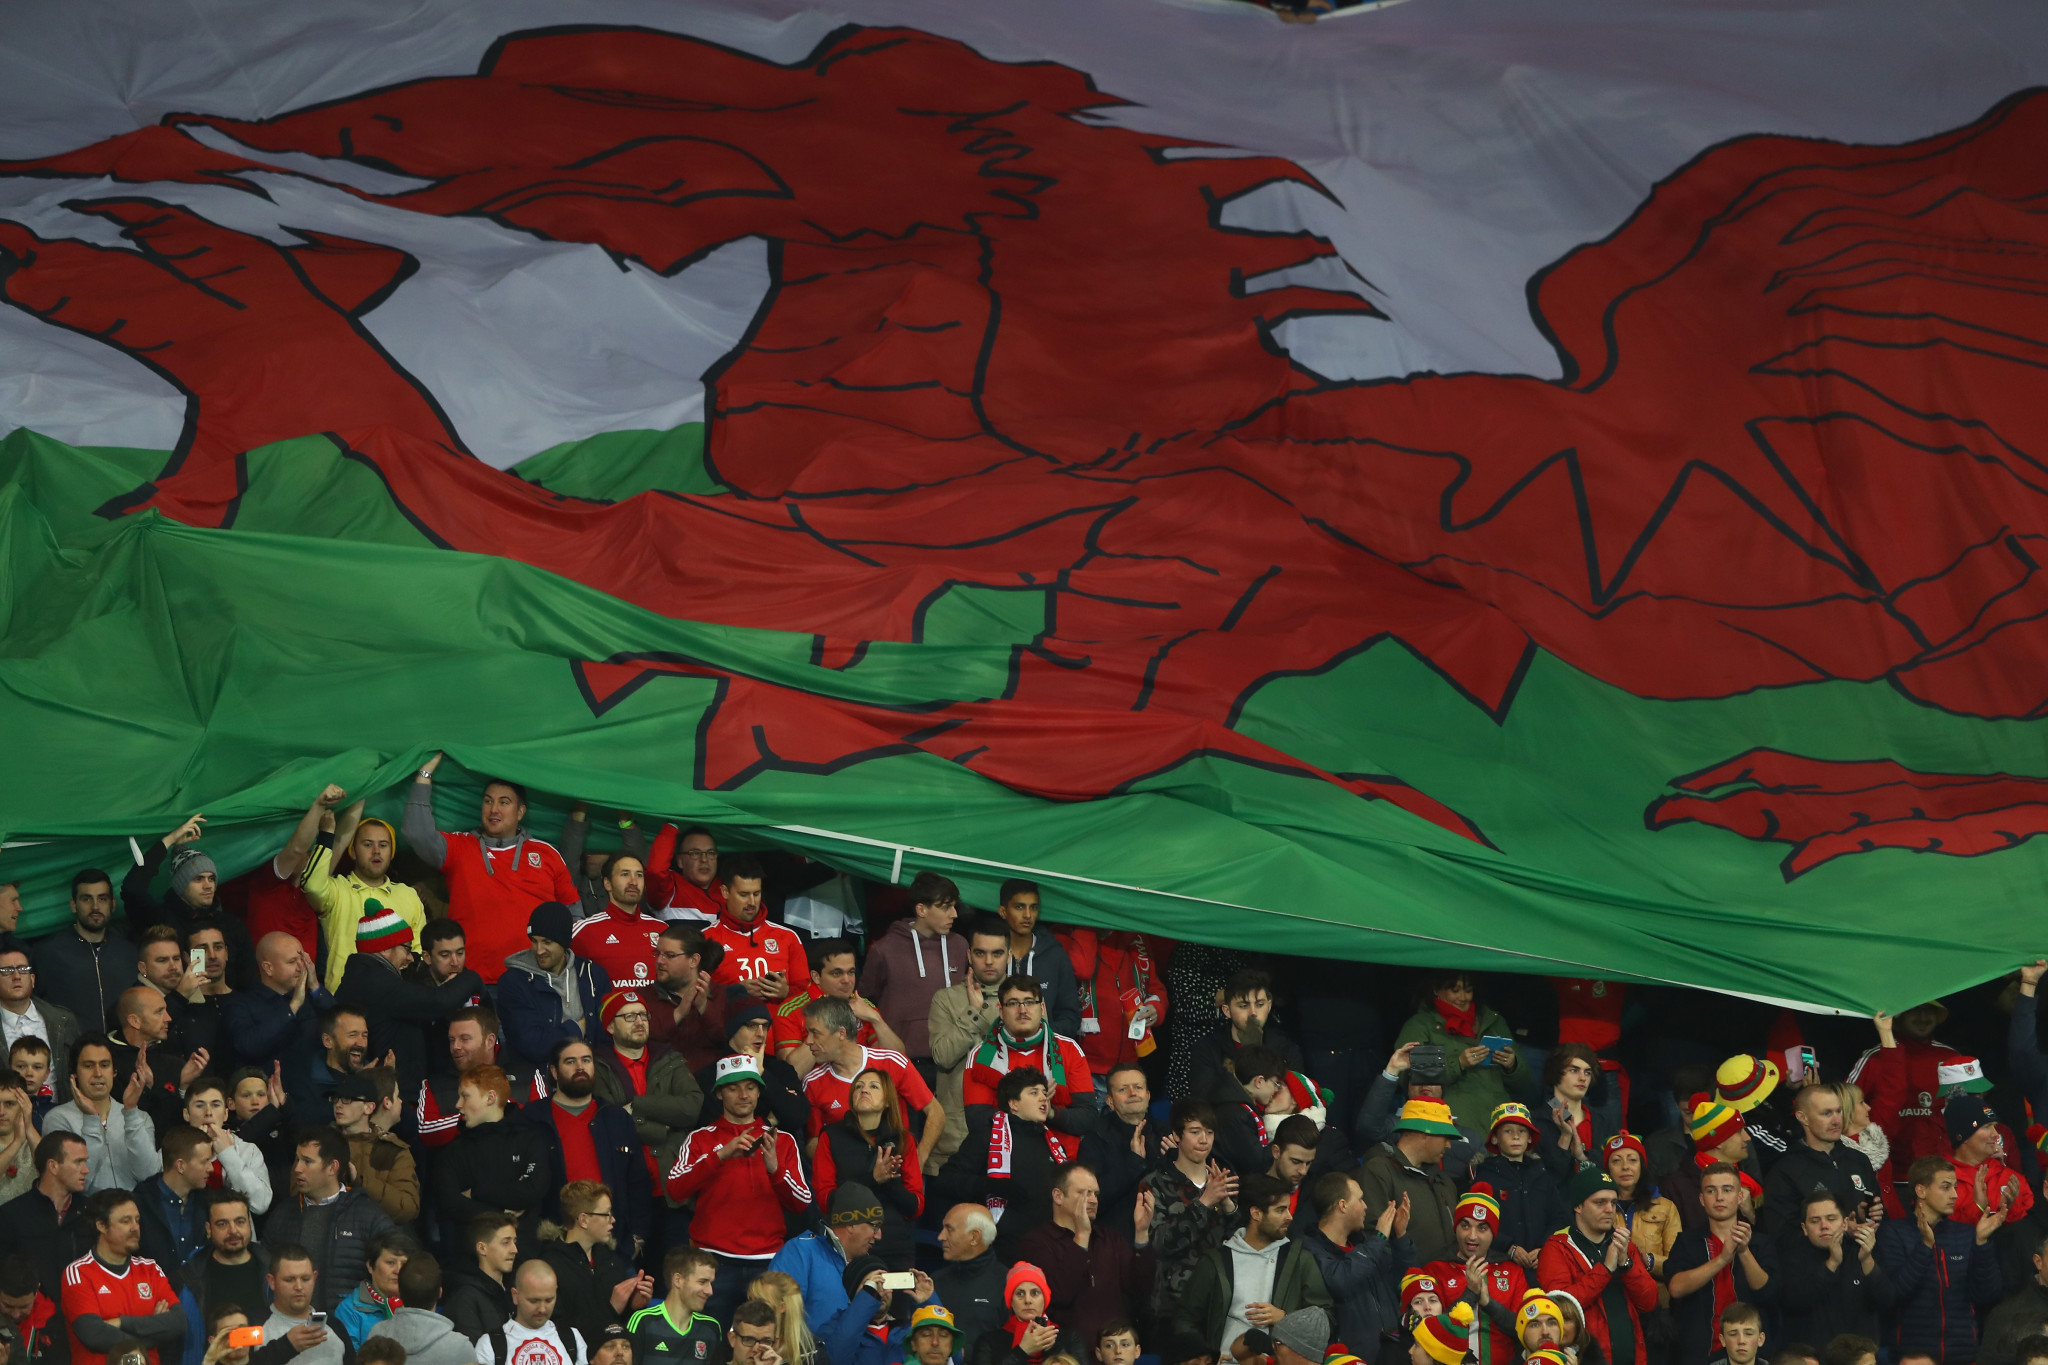 Plaid Cymru promises Commonwealth Games bid if elected Welsh Government